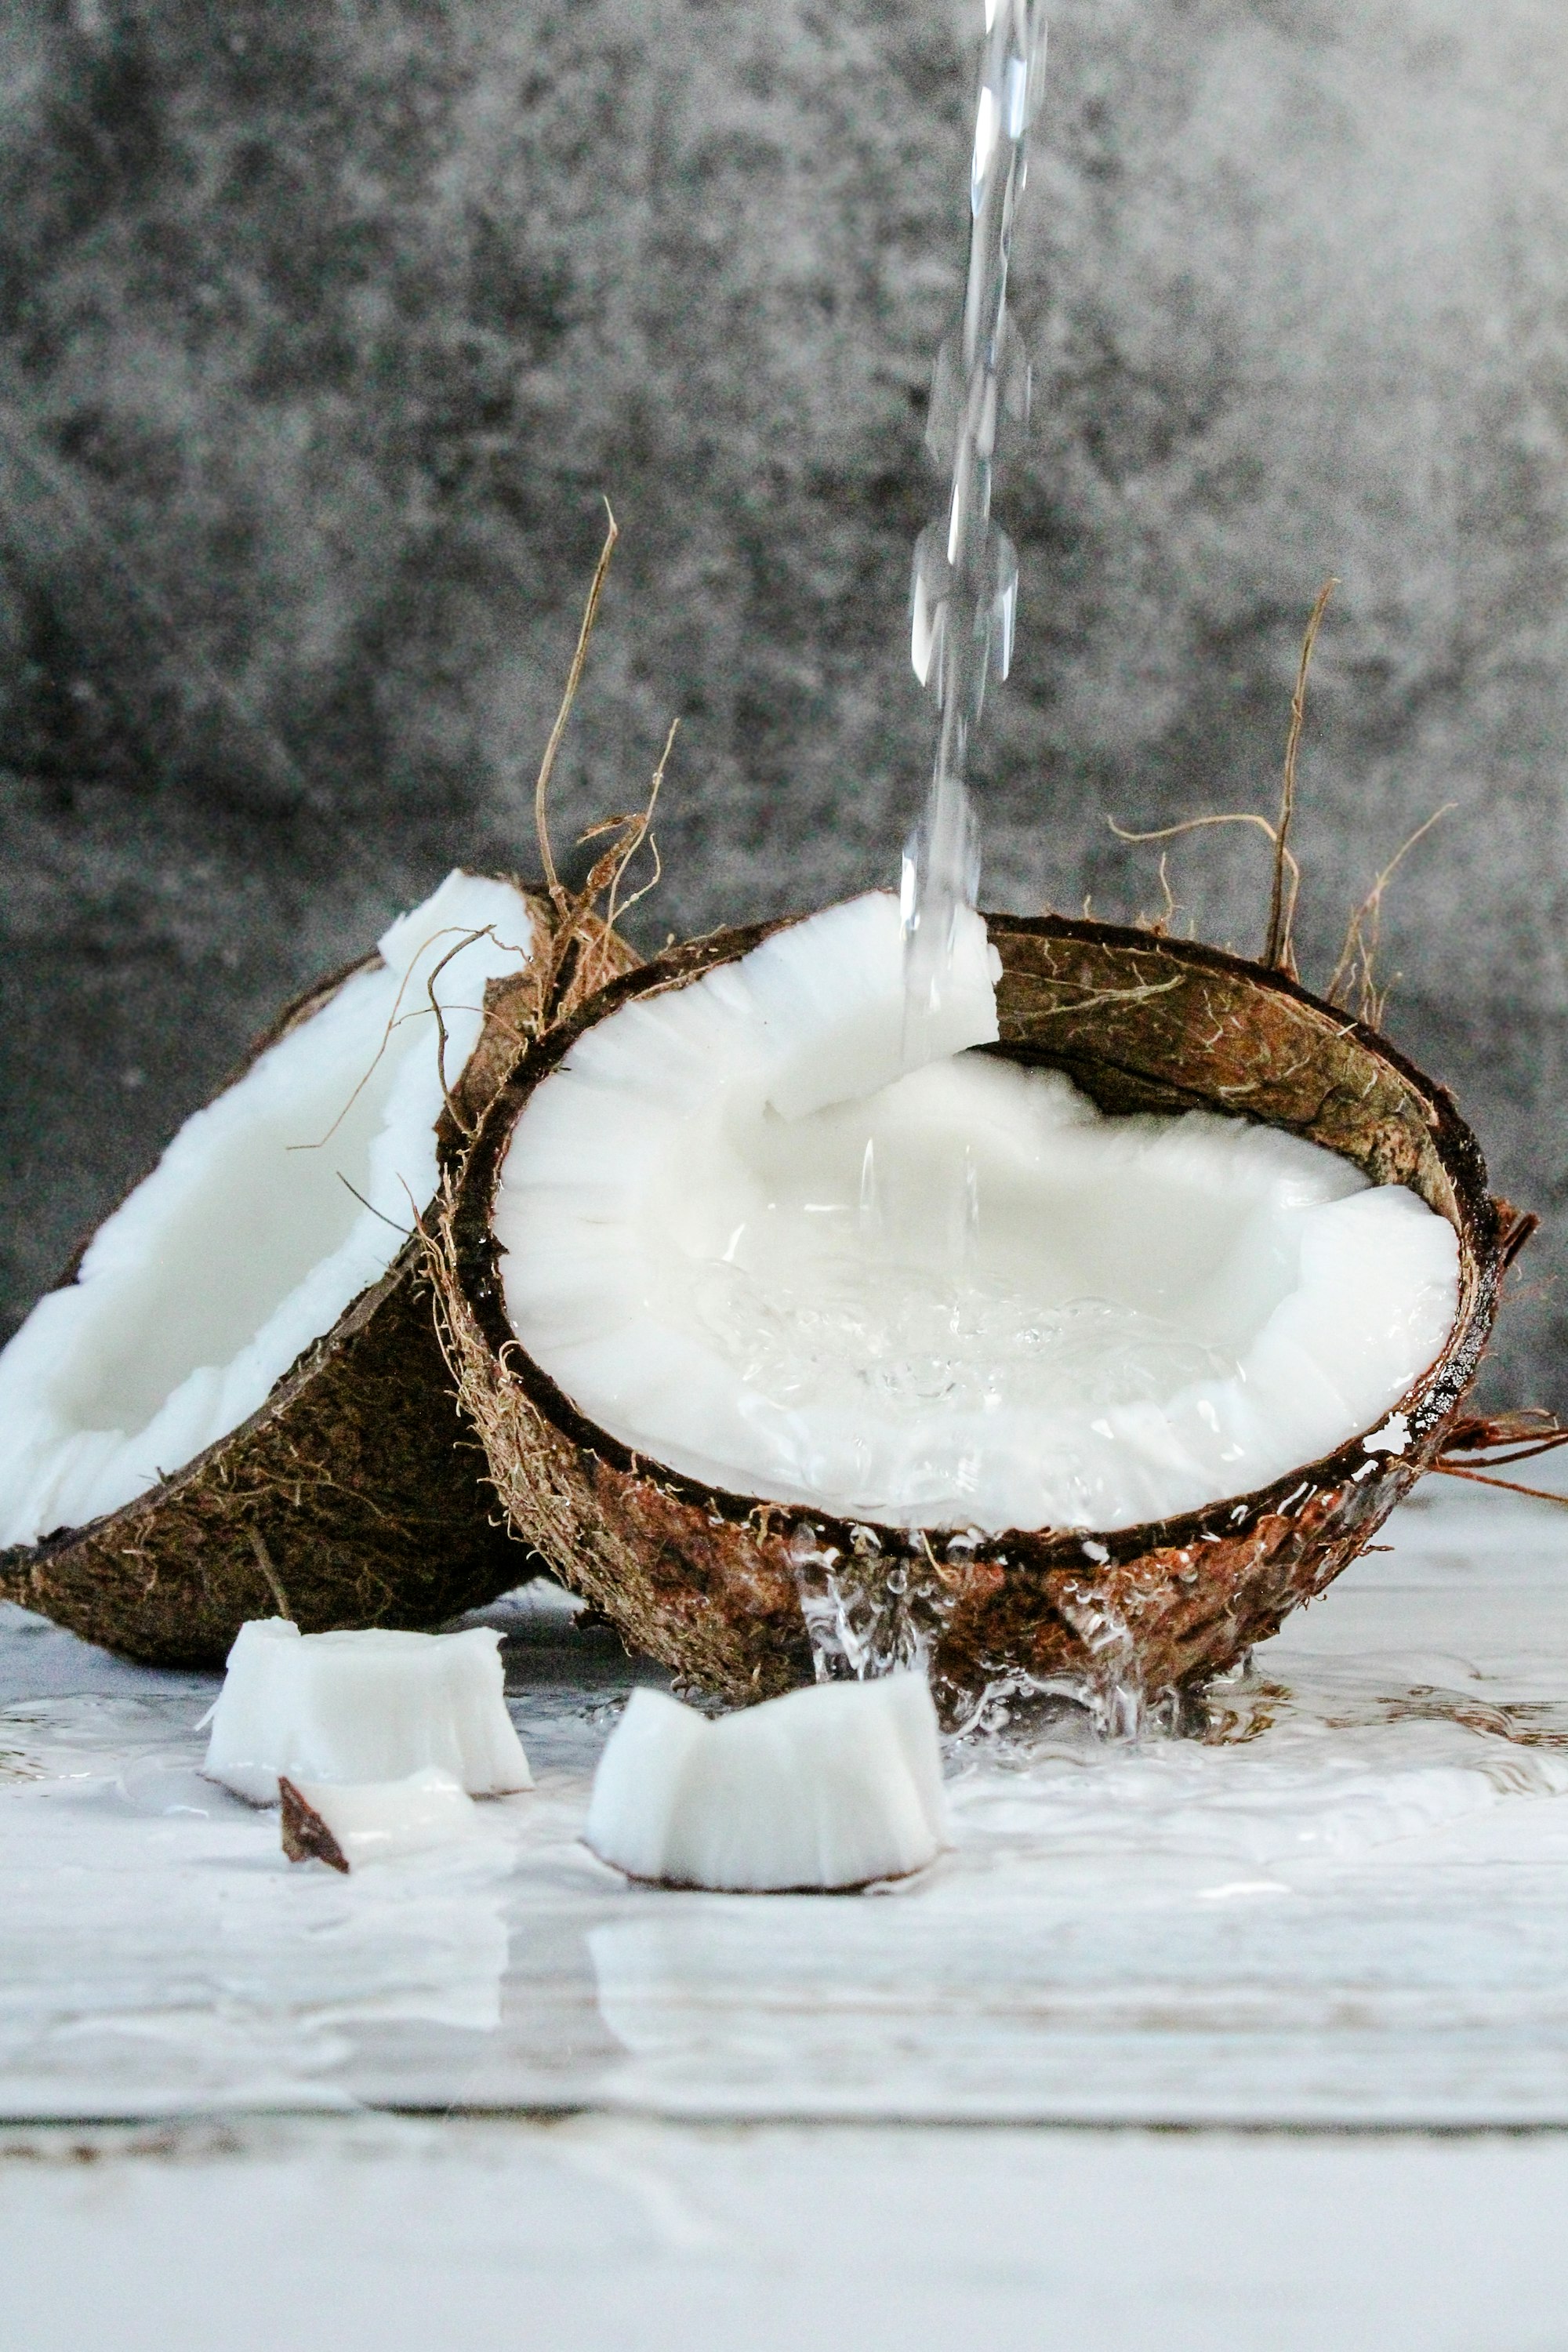 Cracked Coconut and water splash